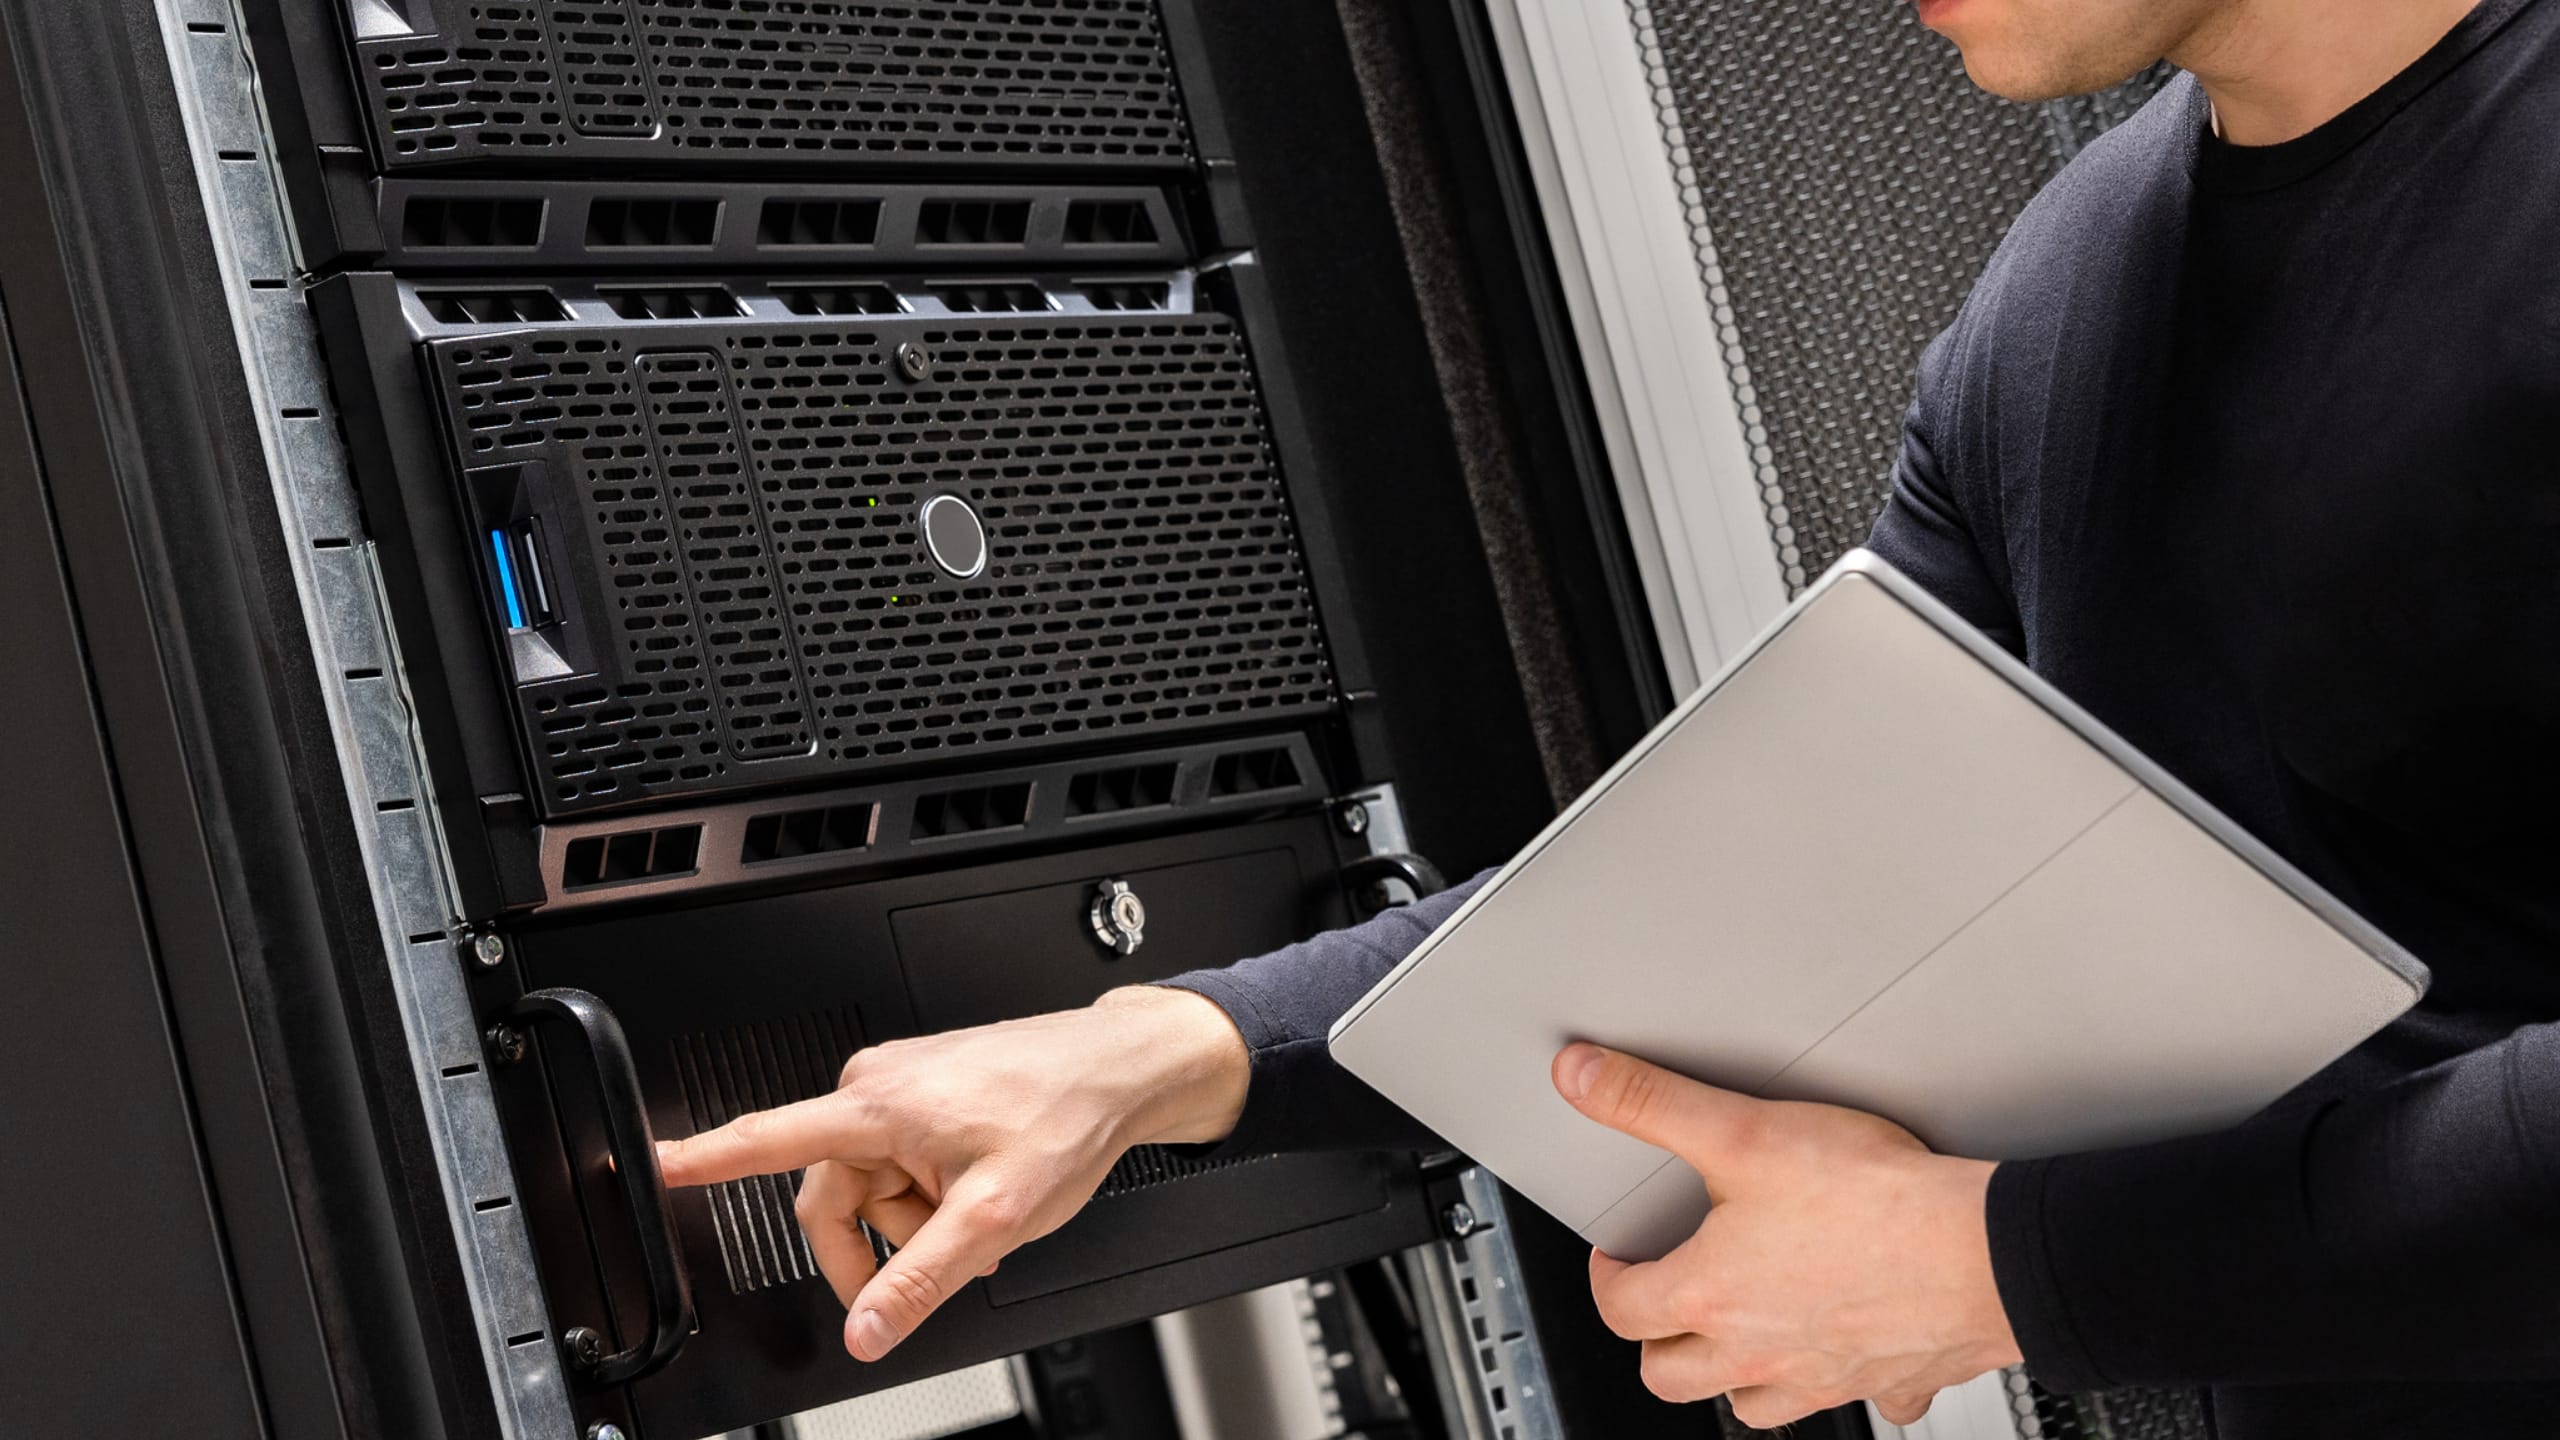 How to Simplify Troubleshooting and Maintenance With Professional Managed Network Services